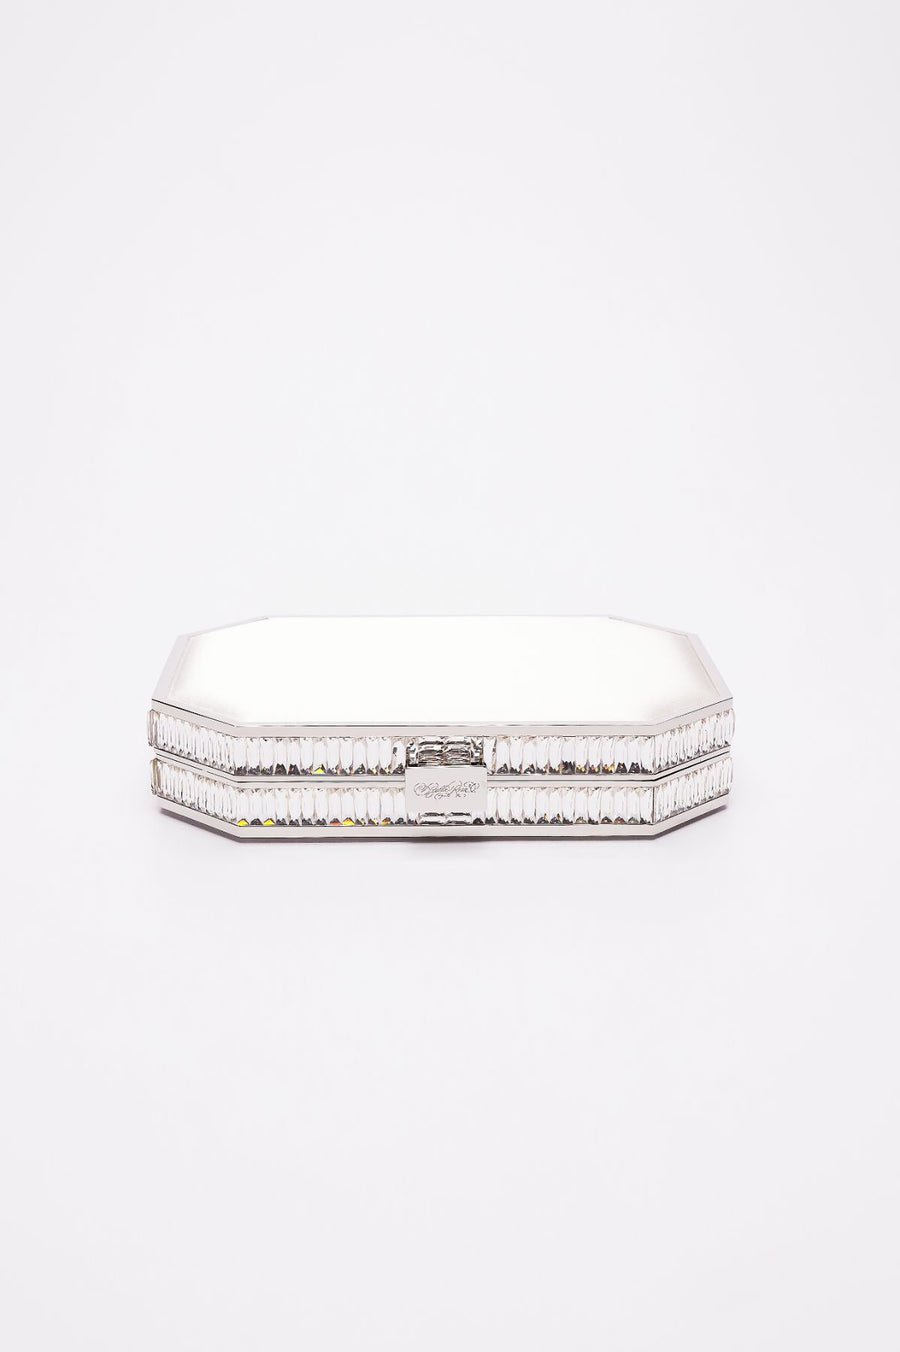 Top closed view of Como clutch in white satin with silver gemmed frame.